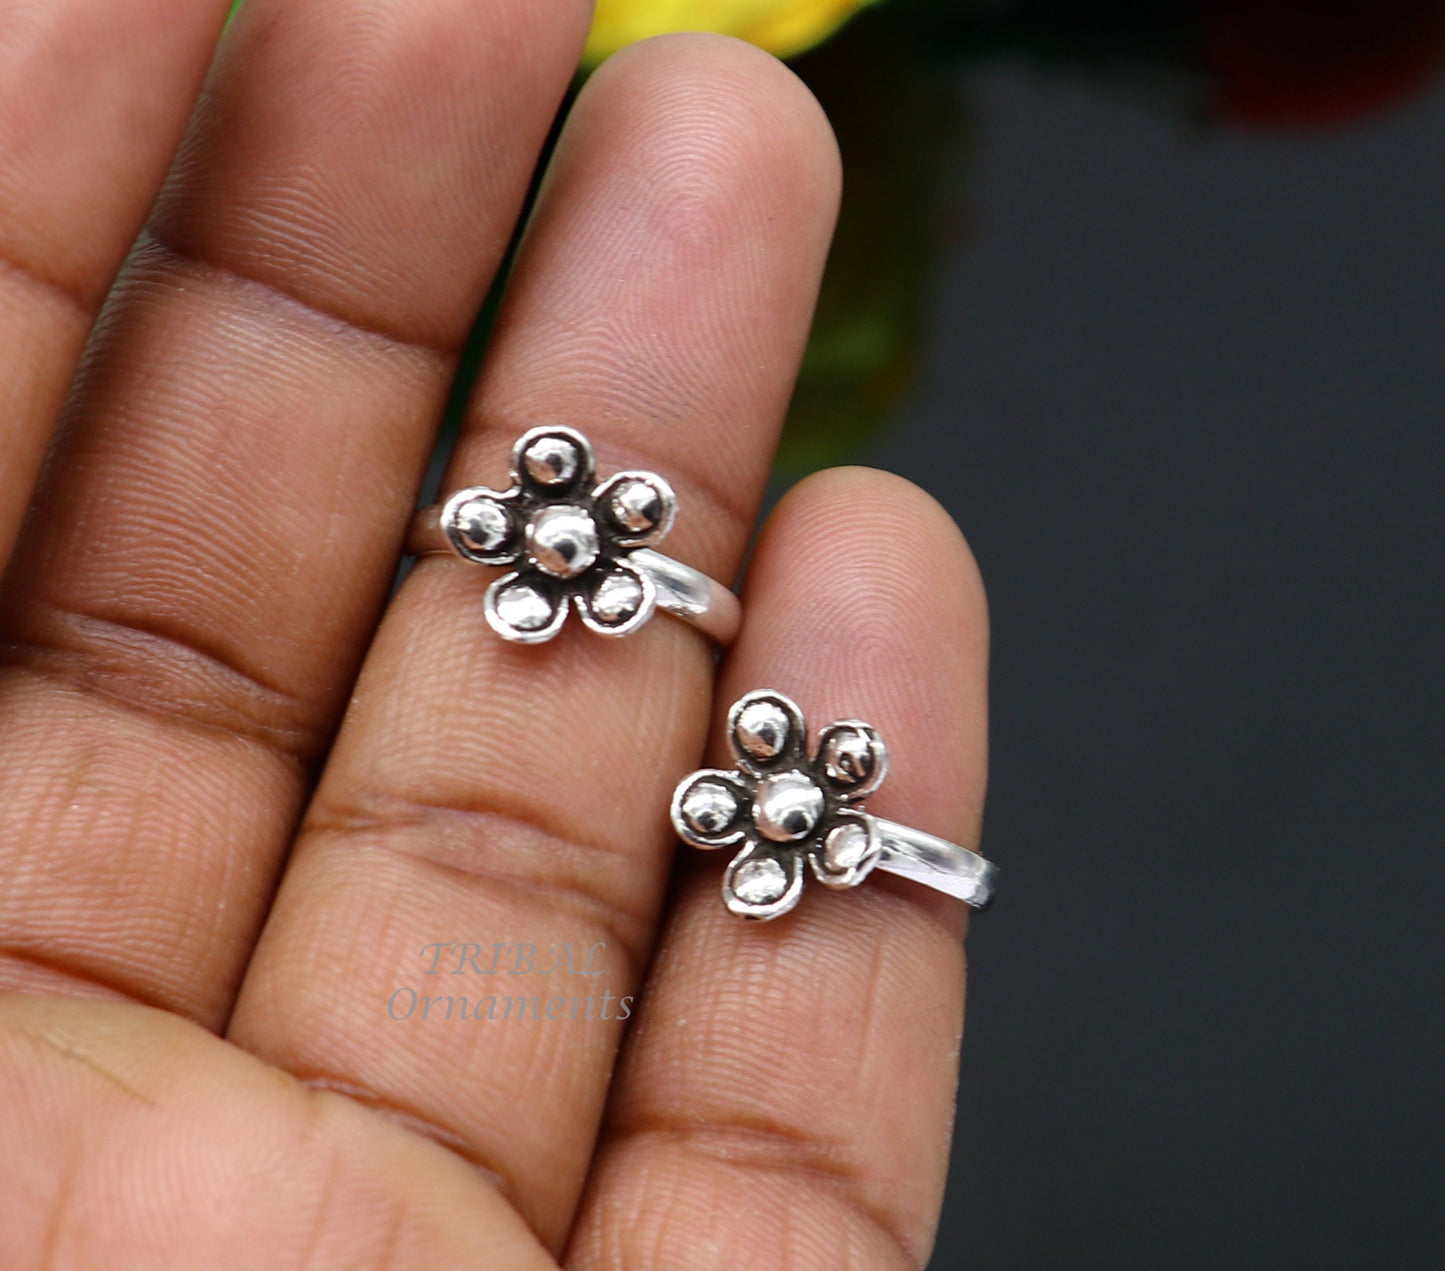 925 sterling silver amazing flower design handmade toe ring, toe band stylish modern women's brides jewelry, india traditional jewelry ytr48 - TRIBAL ORNAMENTS